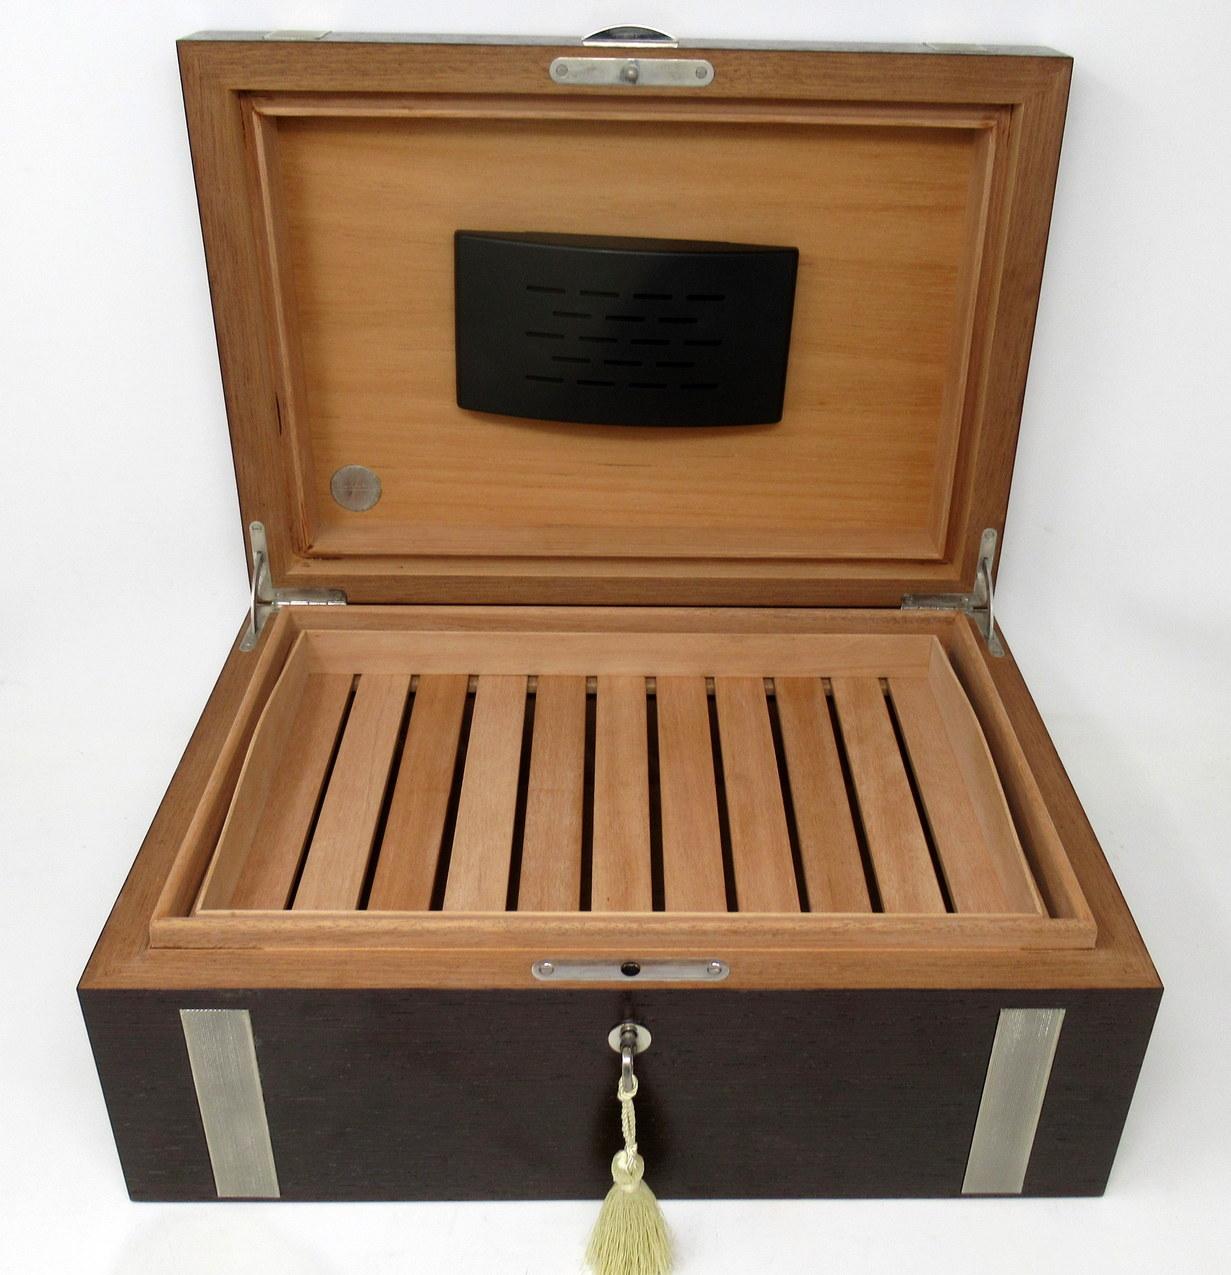 Stunning French polished flame Mahogany wood 1950s style ladies or gentleman's flat topped Cigar Humidor of outstanding quality and generous proportions made by Irish maker Manning of Ireland, with stylish fitted interior which includes a full width